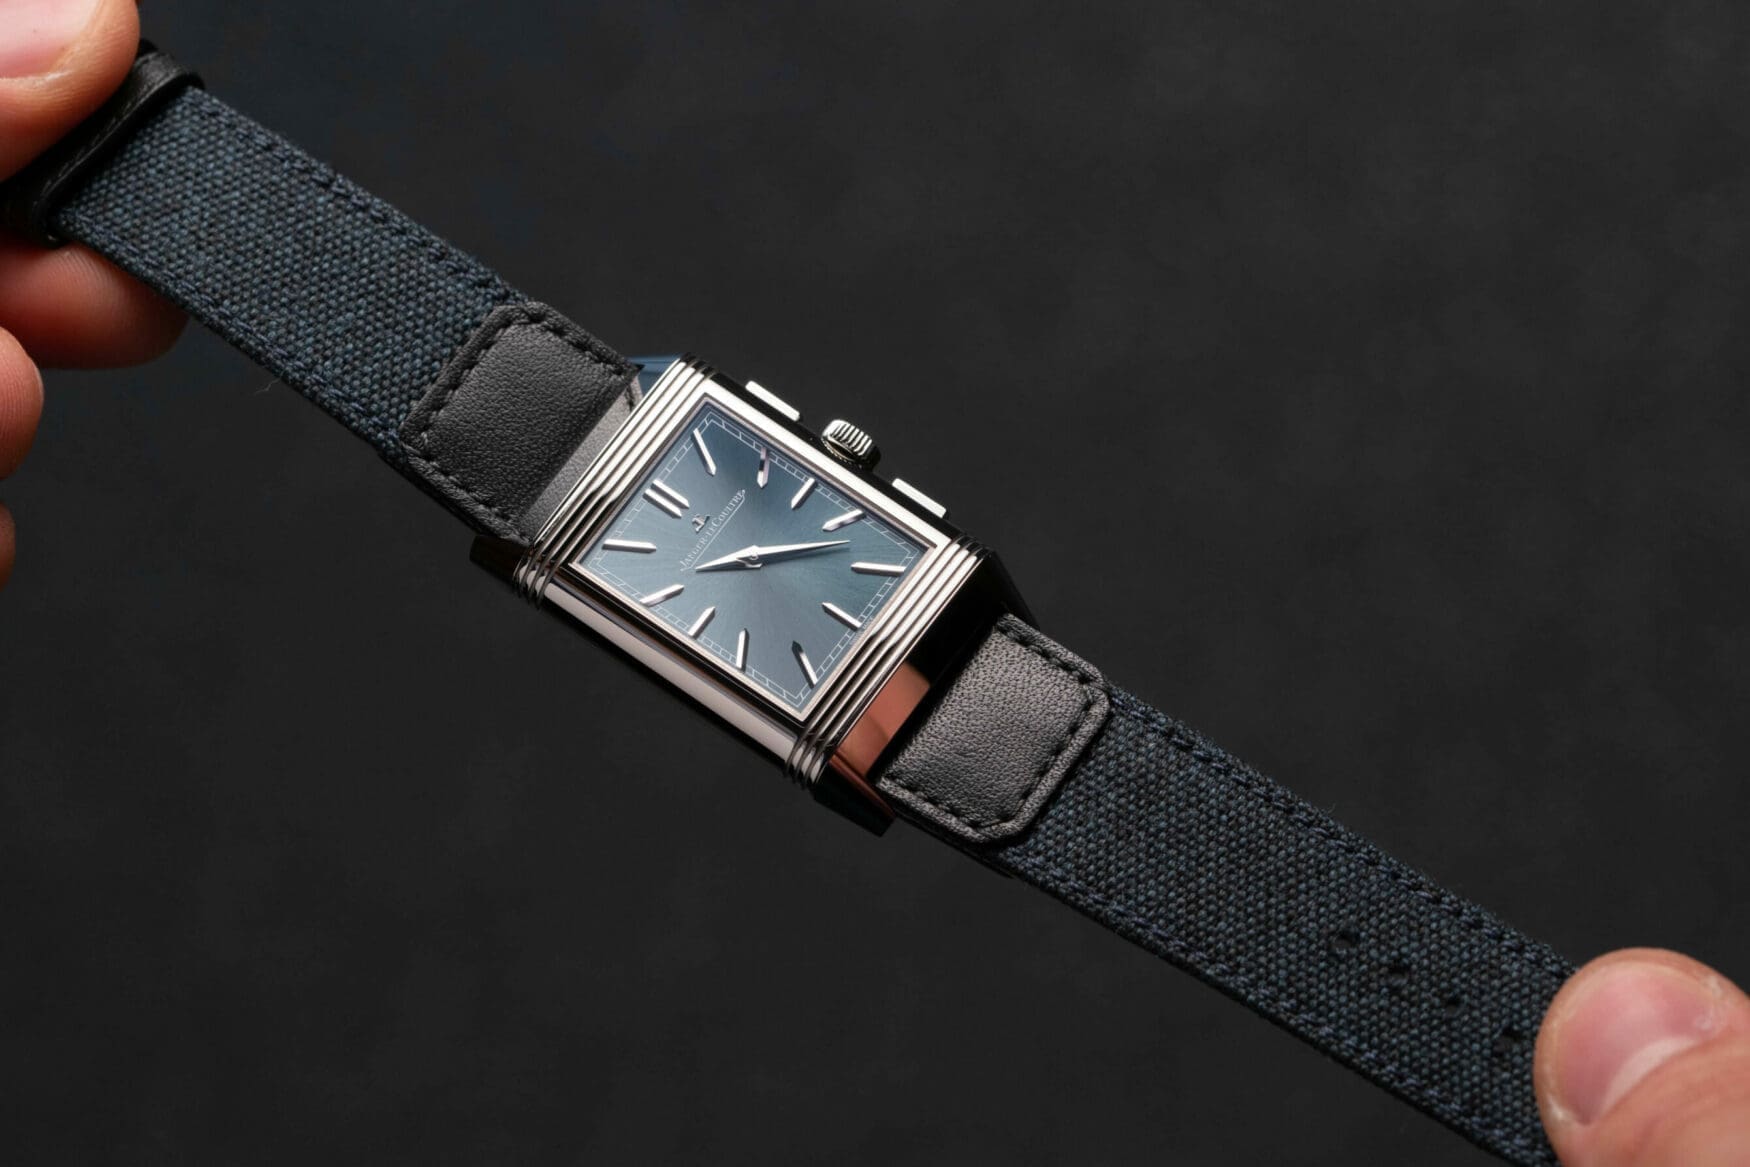 Jaeger-LeCoultre’s Reverso Tribute Chronograph arguably won Watches & Wonders 2023